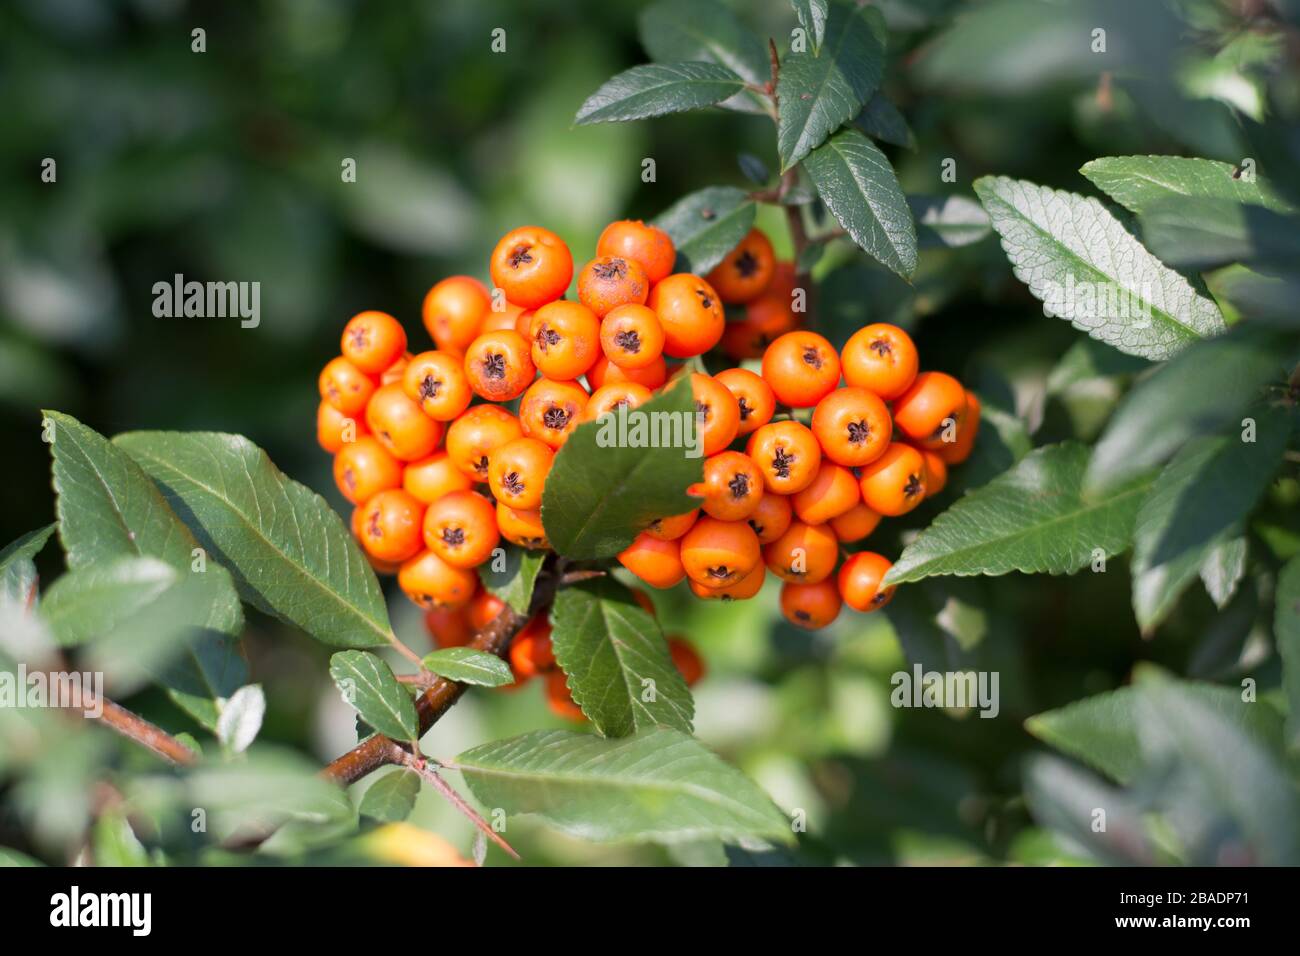 Bunch of orange firethorn berries surrounded with leaves Stock Photo